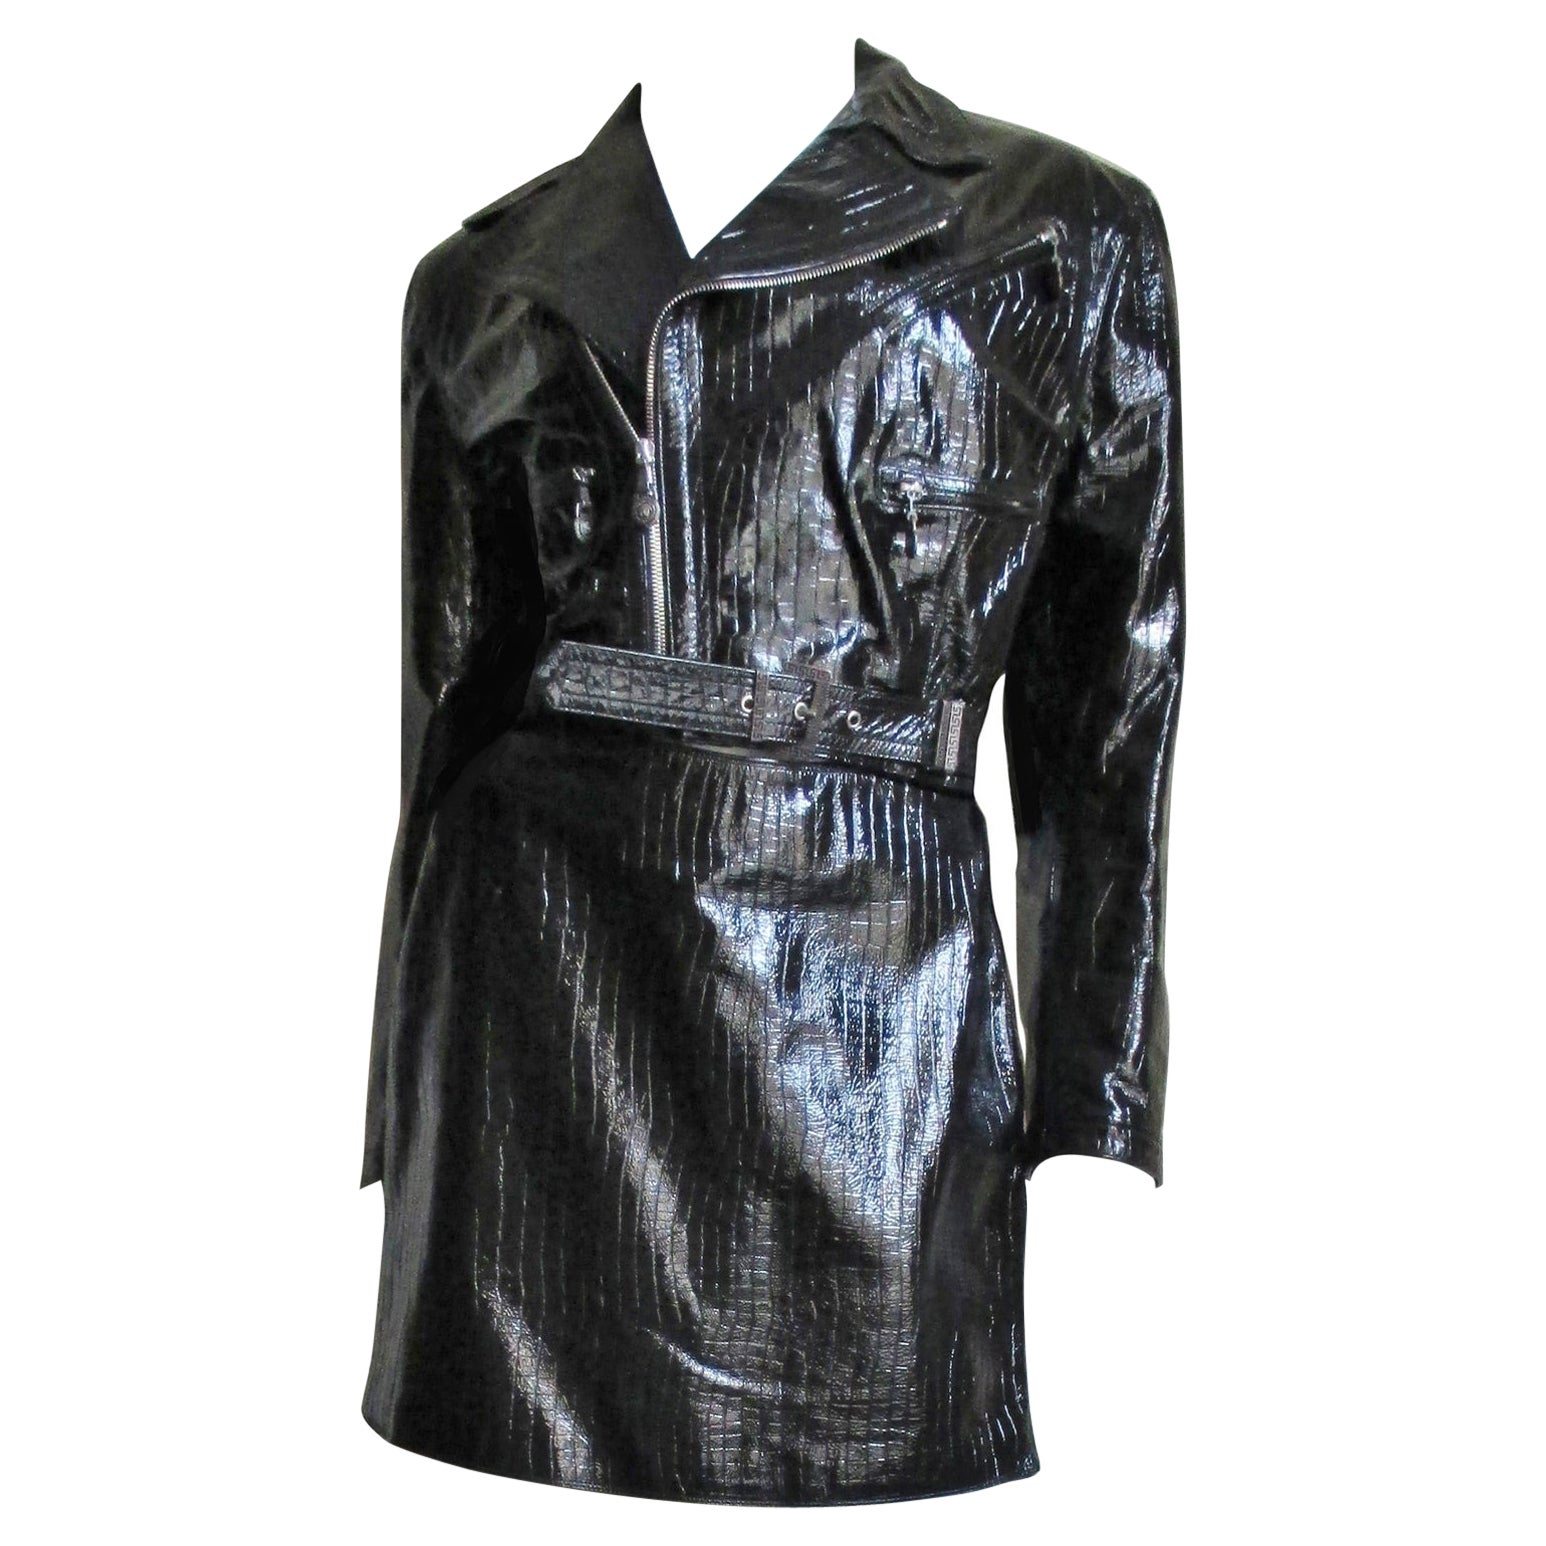 Gianni Versace Leather Motorcycle Jacket and Skirt A/W 1994